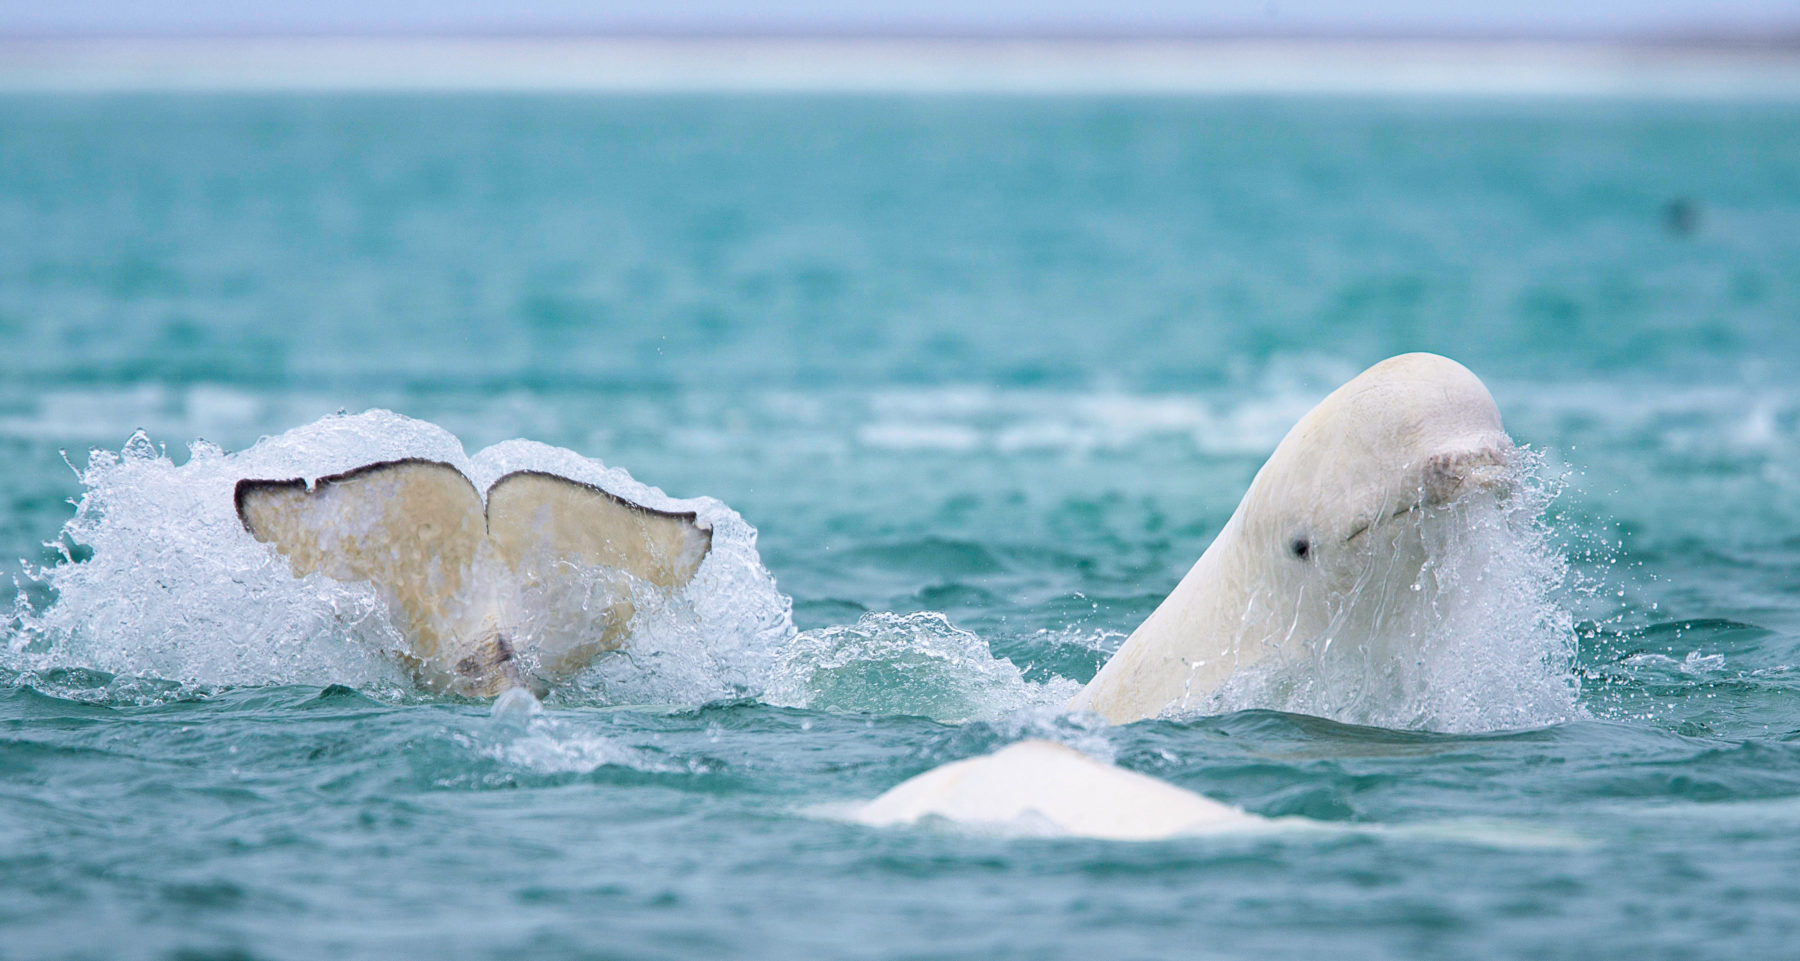 Viewing Cute Beluga Whale in the Bay is an Arctic Vacations Highlight